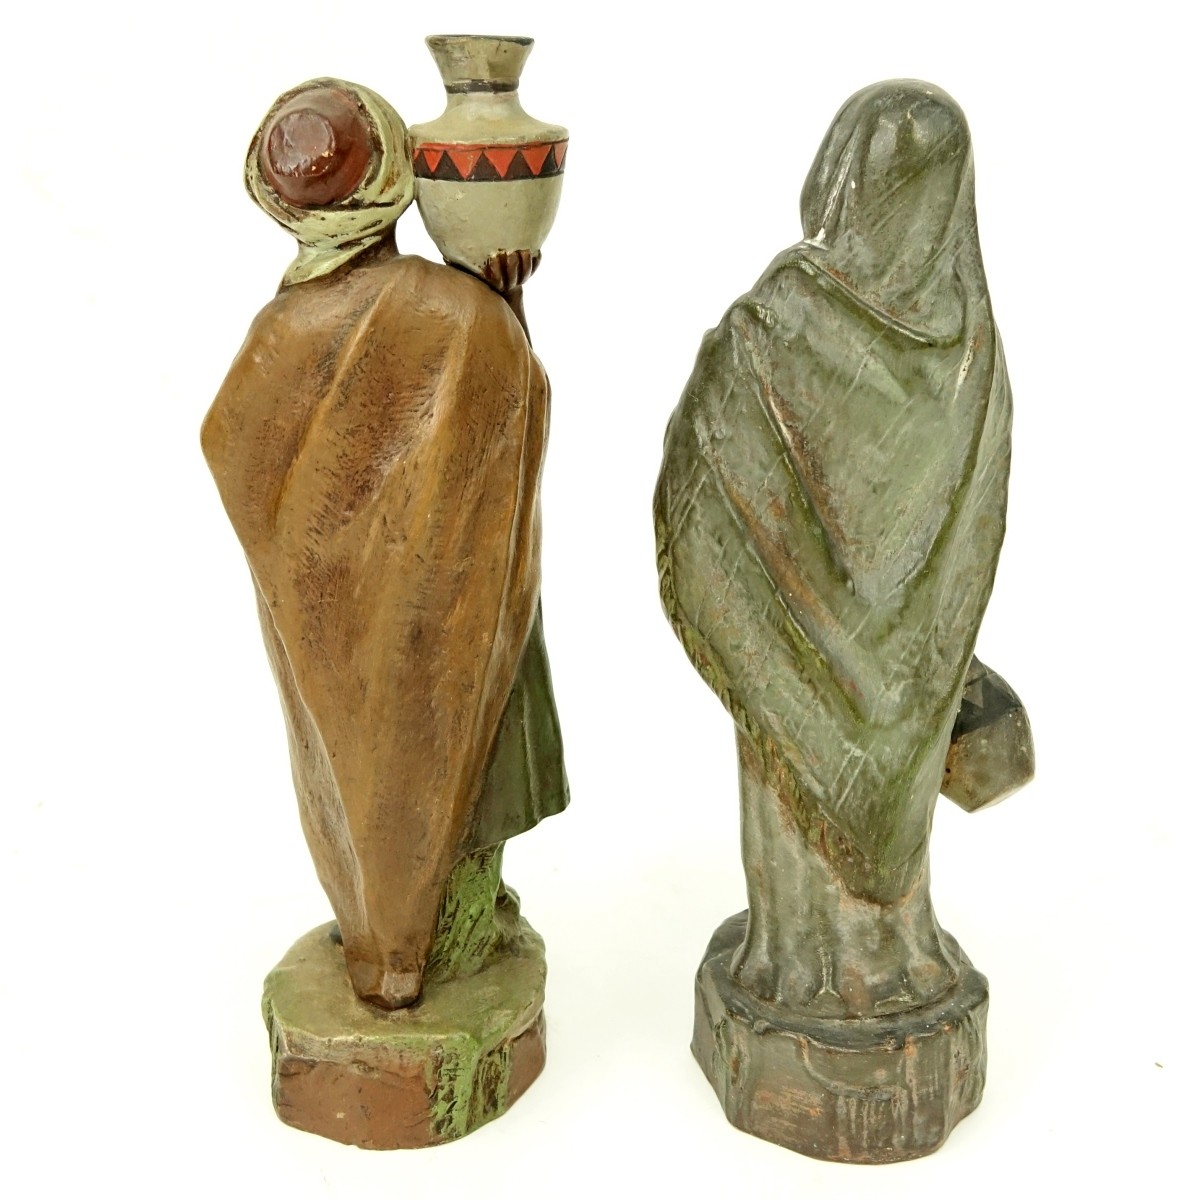 Two Vintage Polychrome Pottery Bedouin Figures